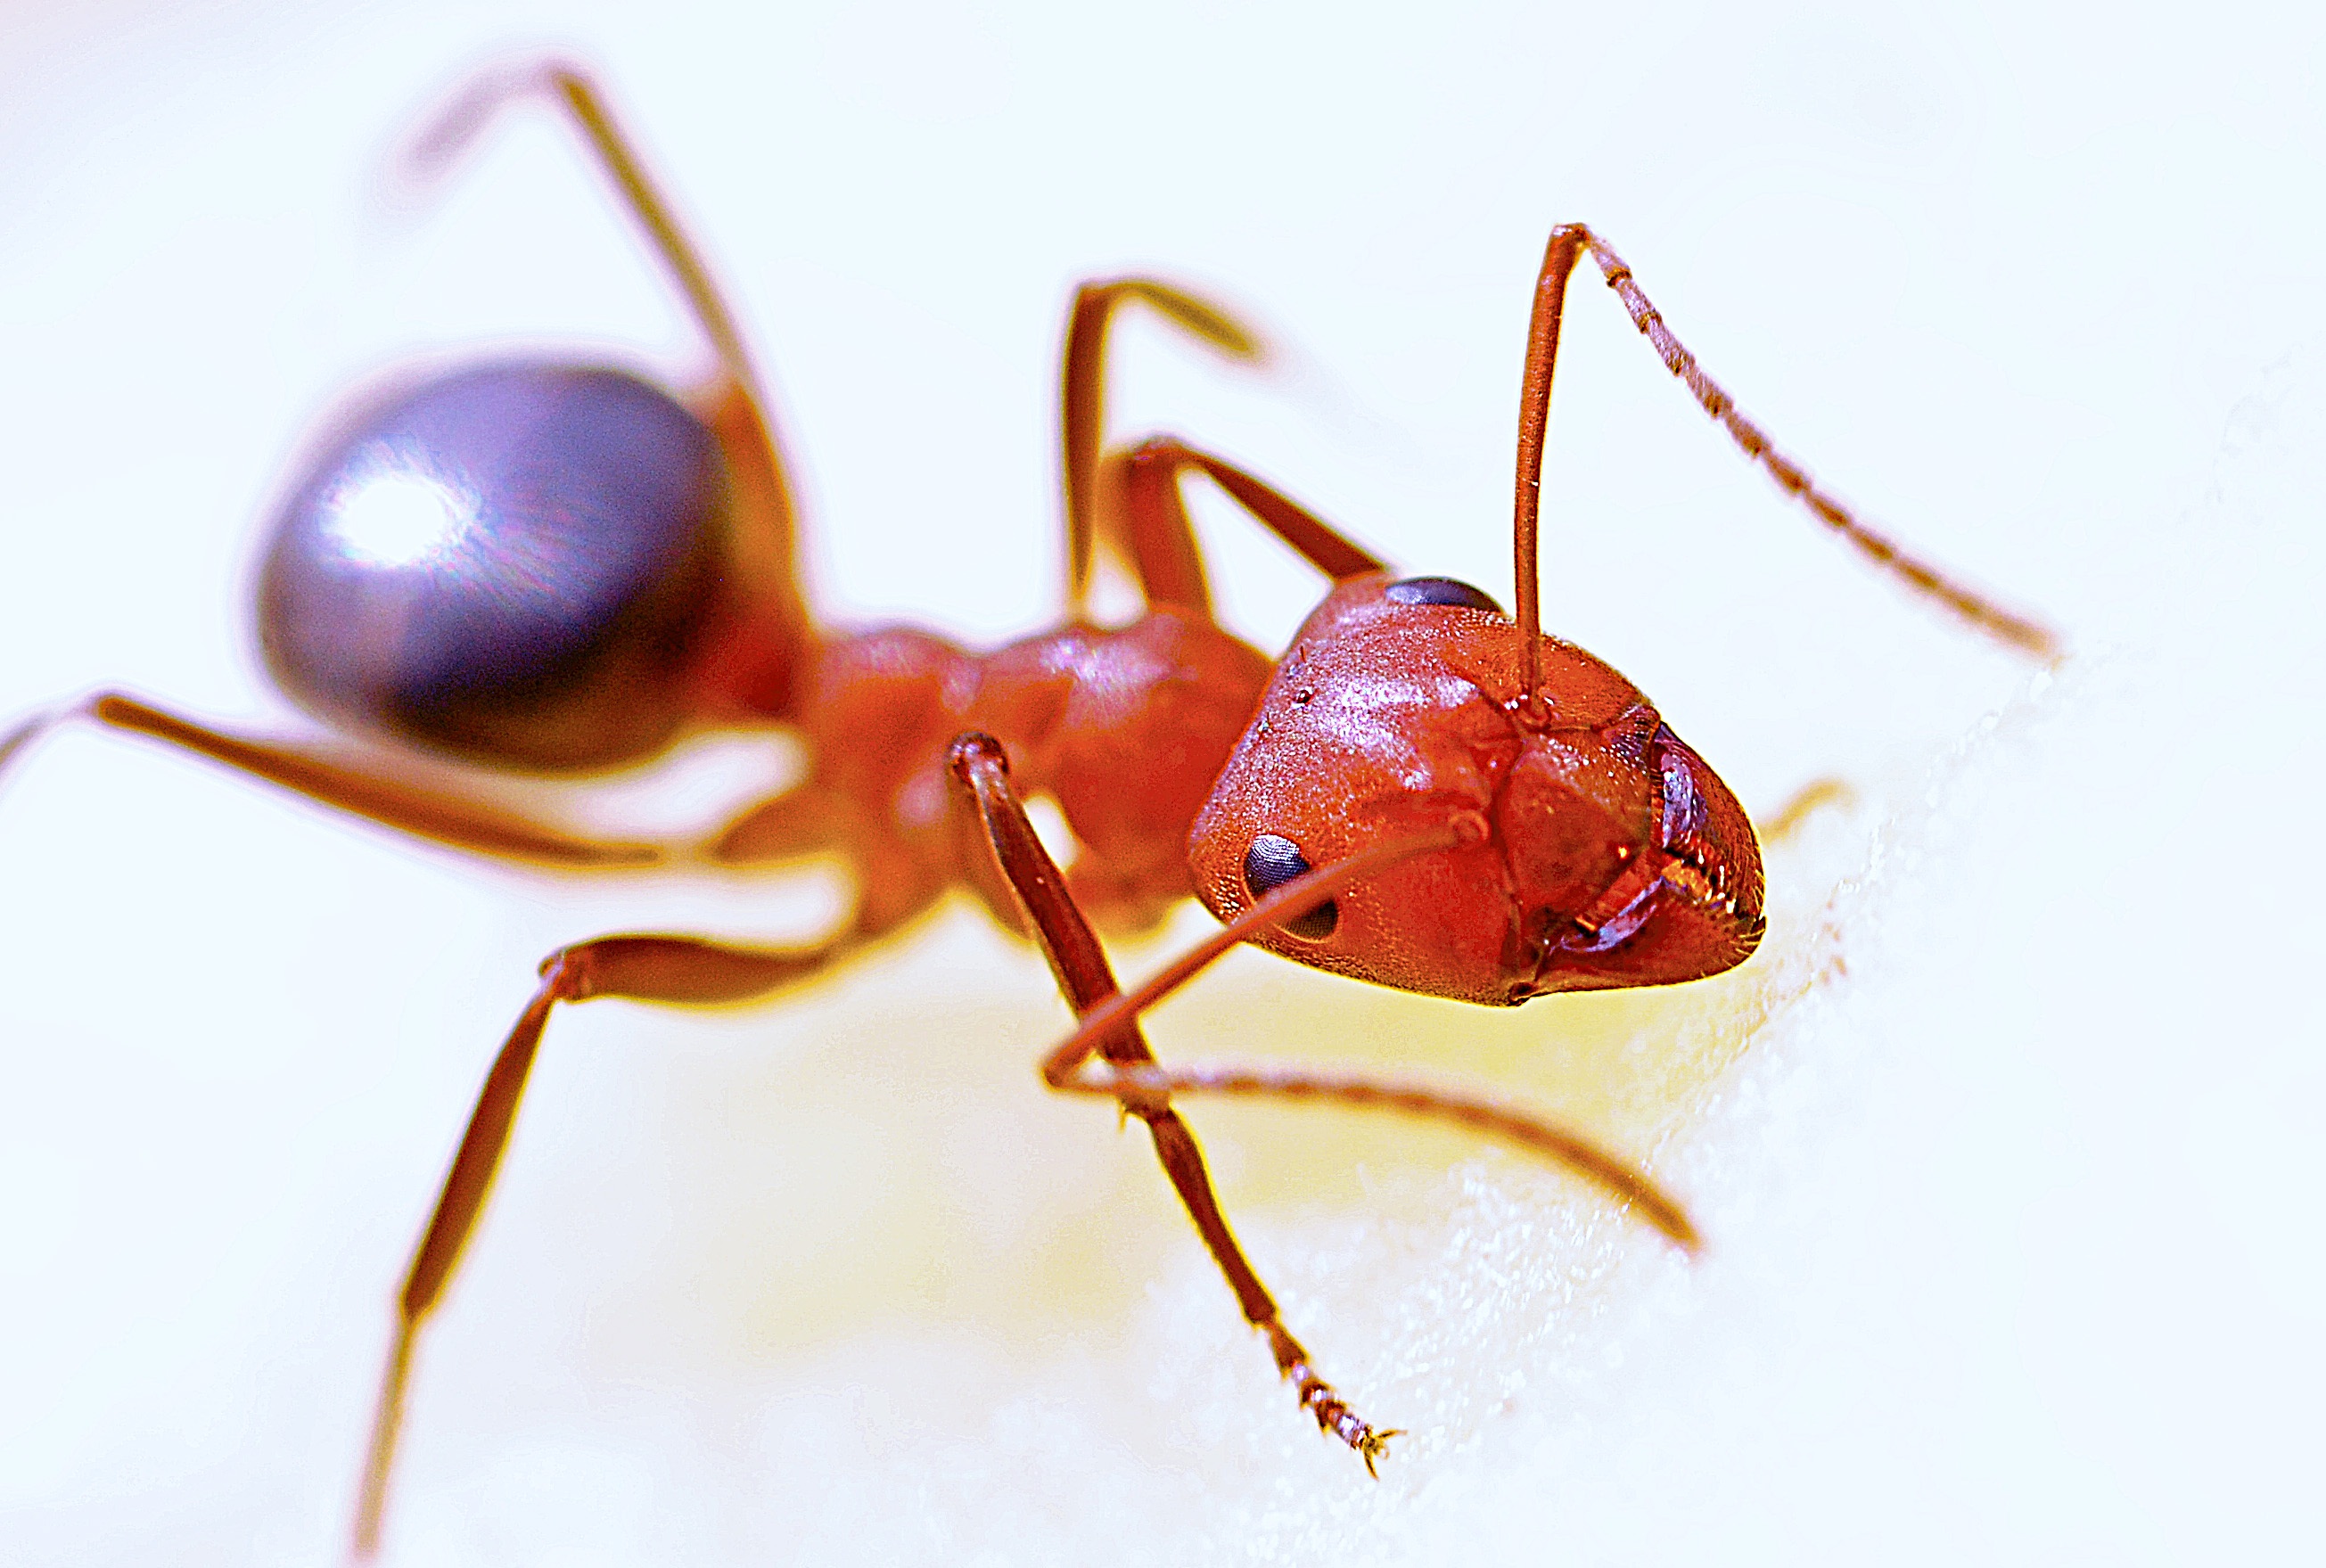 Fire ant photo